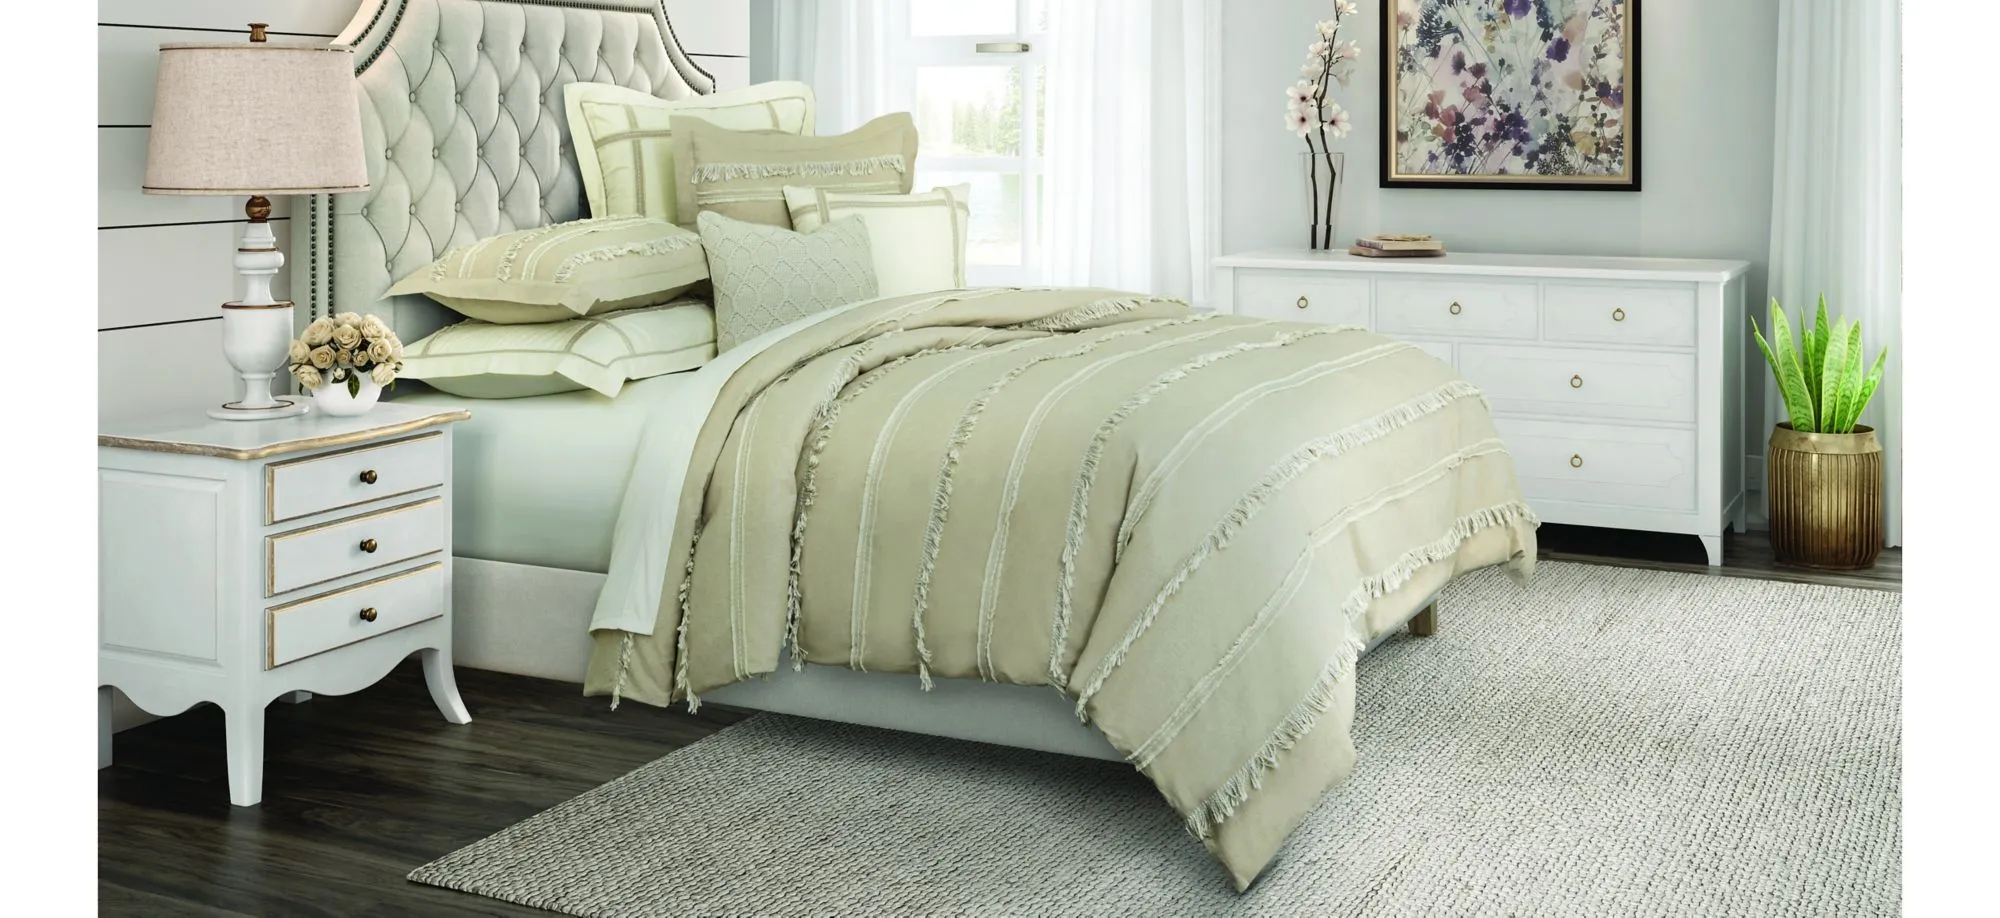 Country Lane 7-Piece Duvet Set in Tan, Natural by Amini Innovation